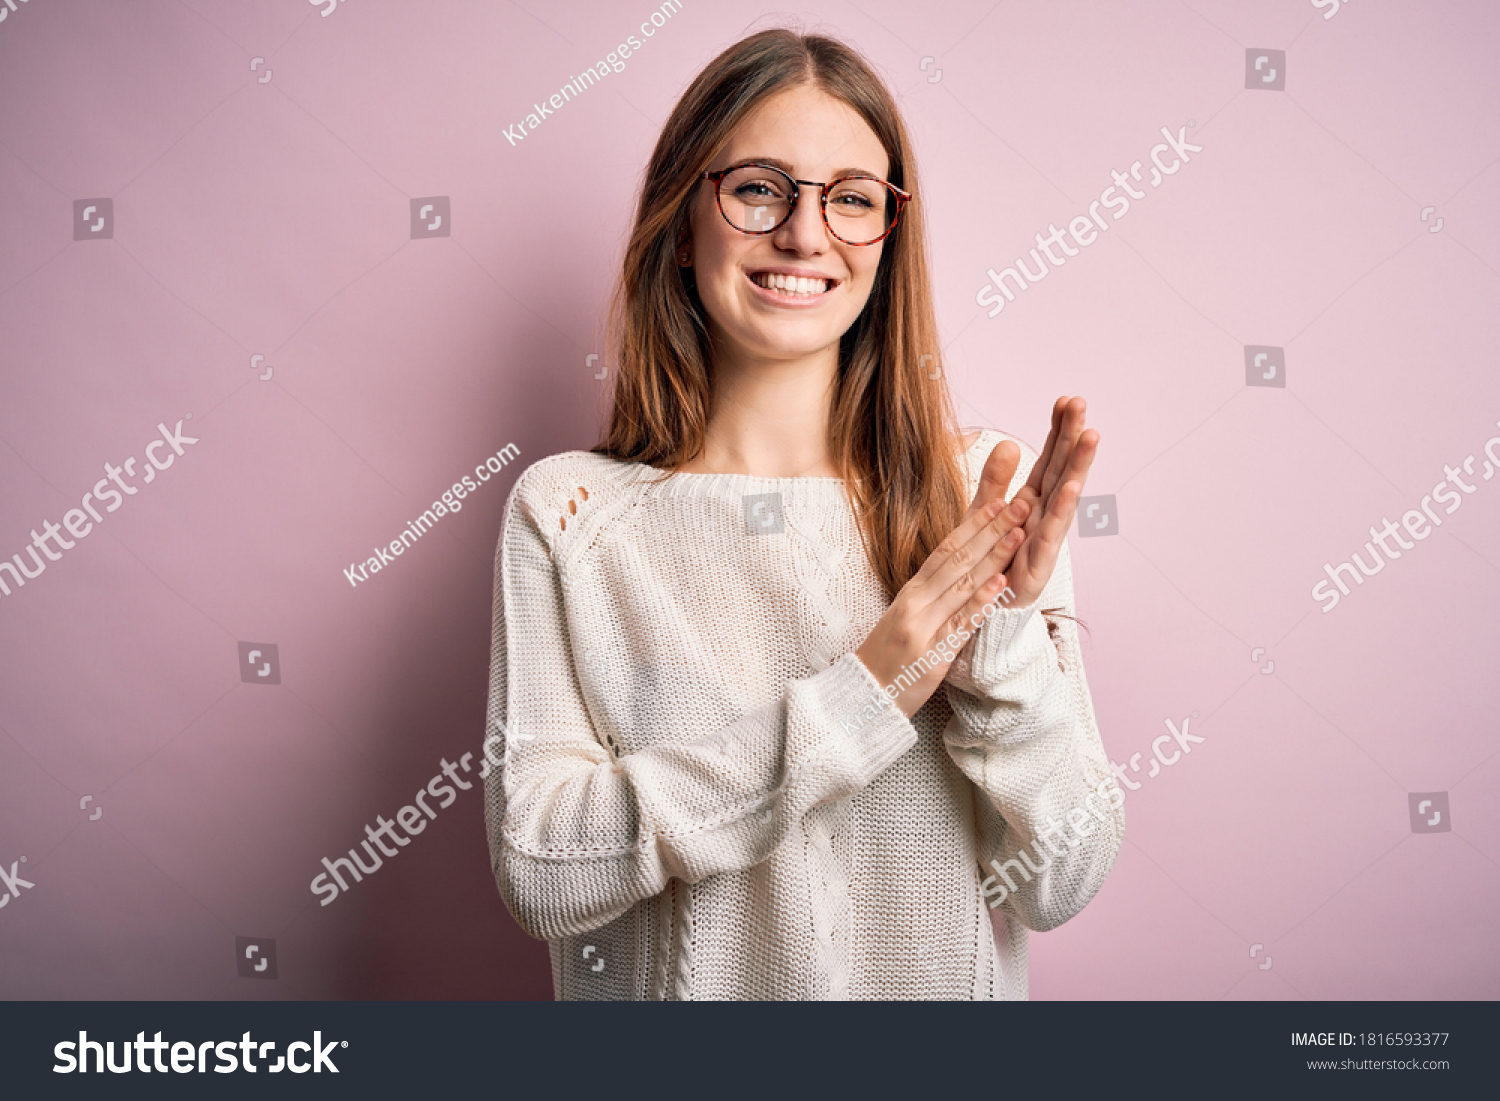 Young beautiful redhead woman wearing casual sweater and glasses over pink background clapping and applauding happy and joyful, smiling proud hands together #1816593377